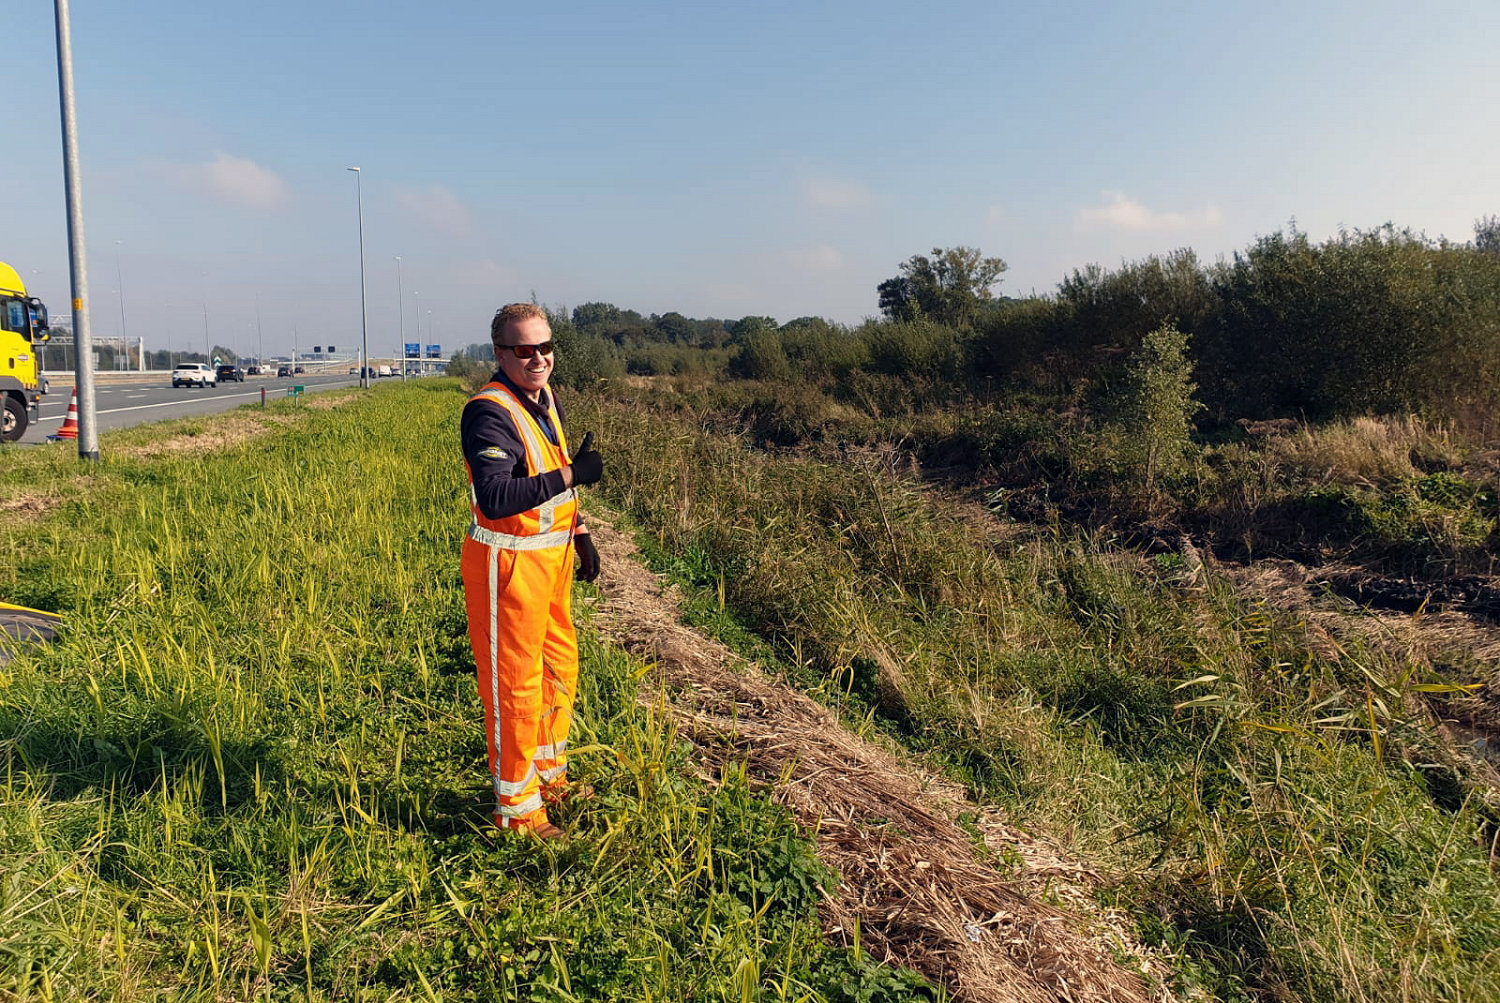 Bjorn Schipper of Bergnet recovering a car from a drainage ditch next to the A6 at Almere on 9 October 2021